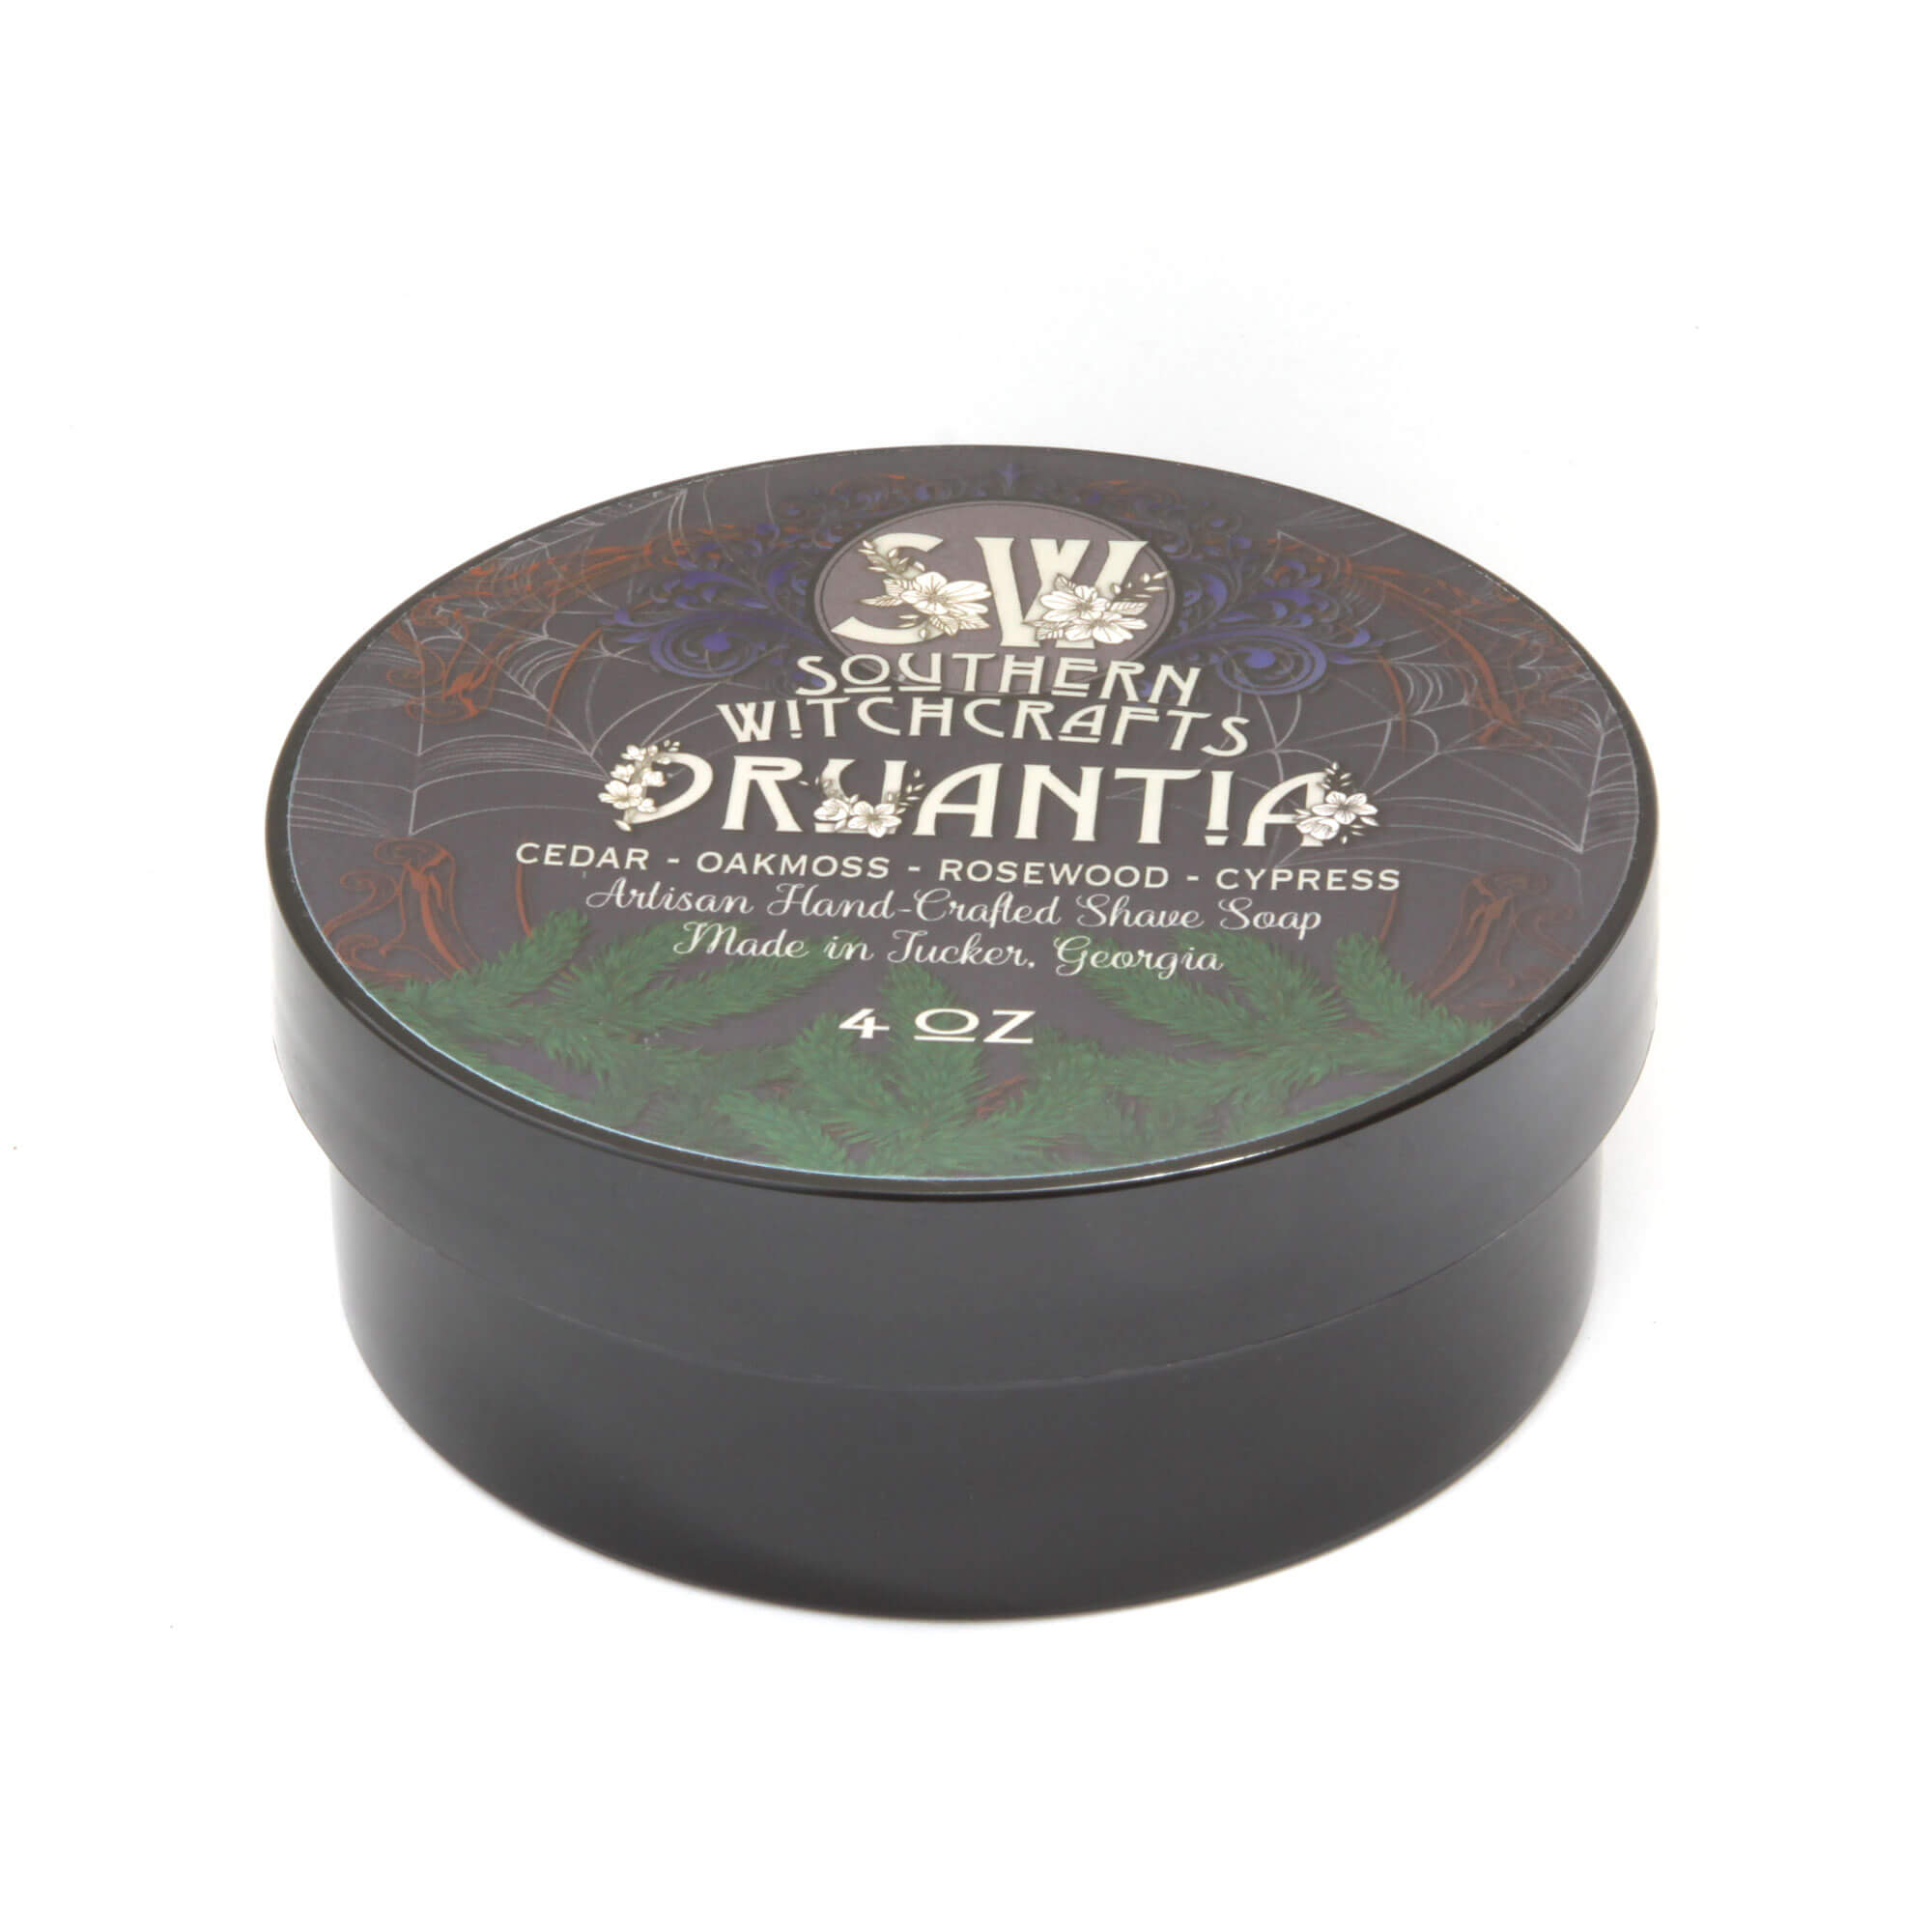 Southern Witchcrafts Druantia Shaving Soap